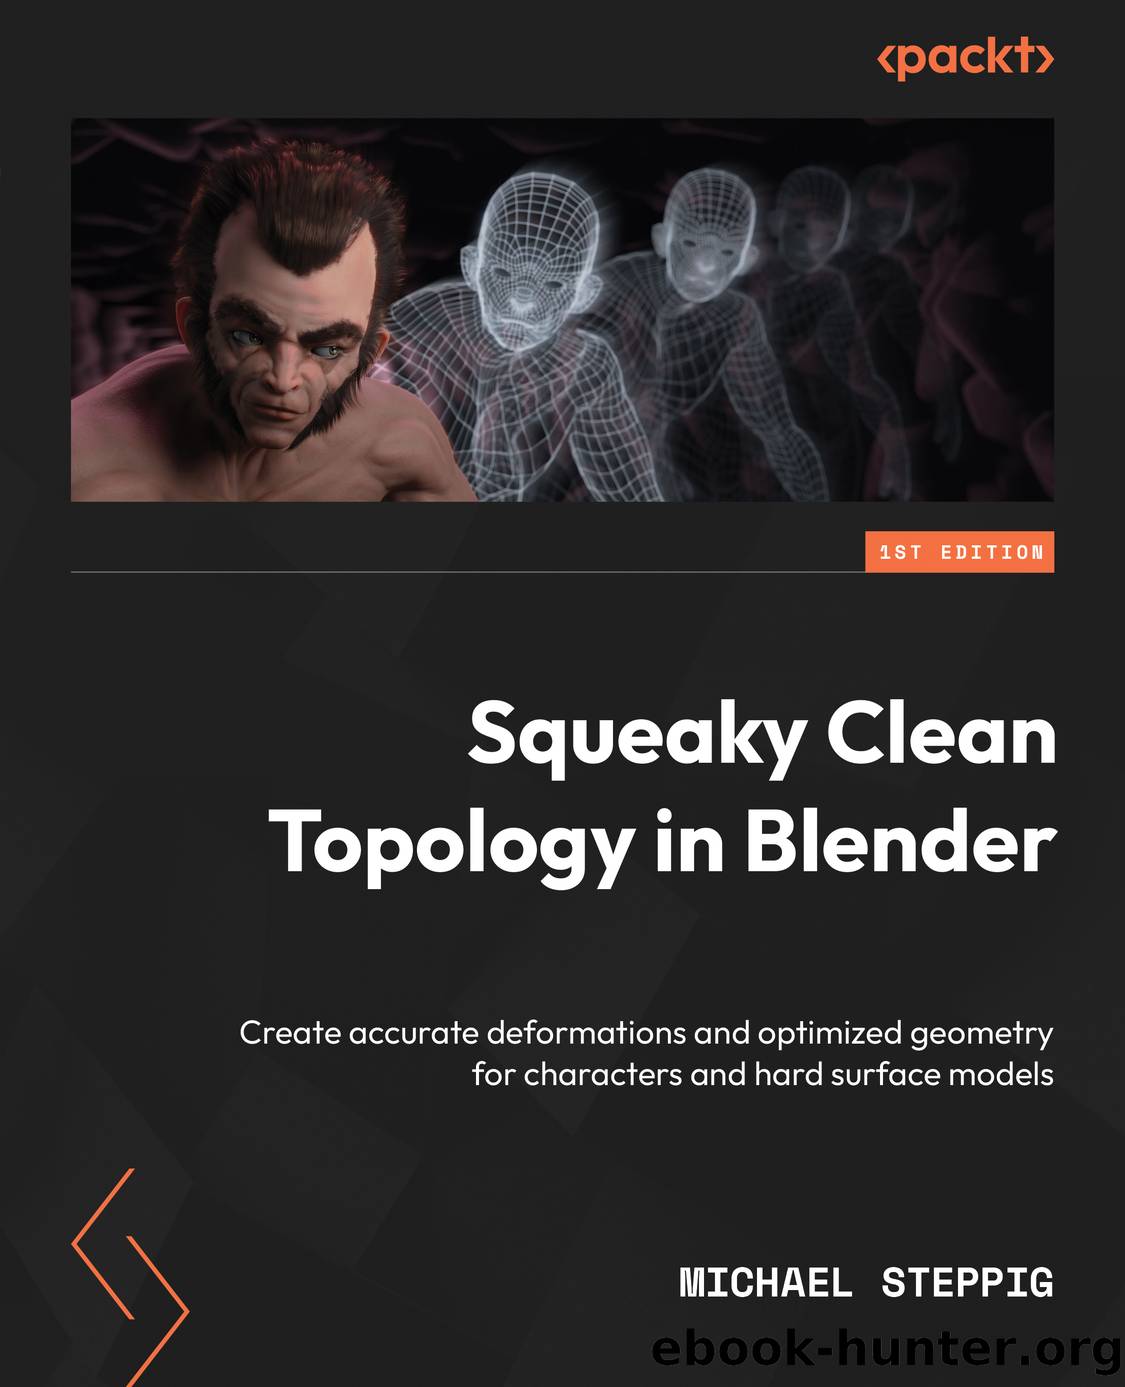 Squeaky Clean Topology in Blender by Michael Steppig